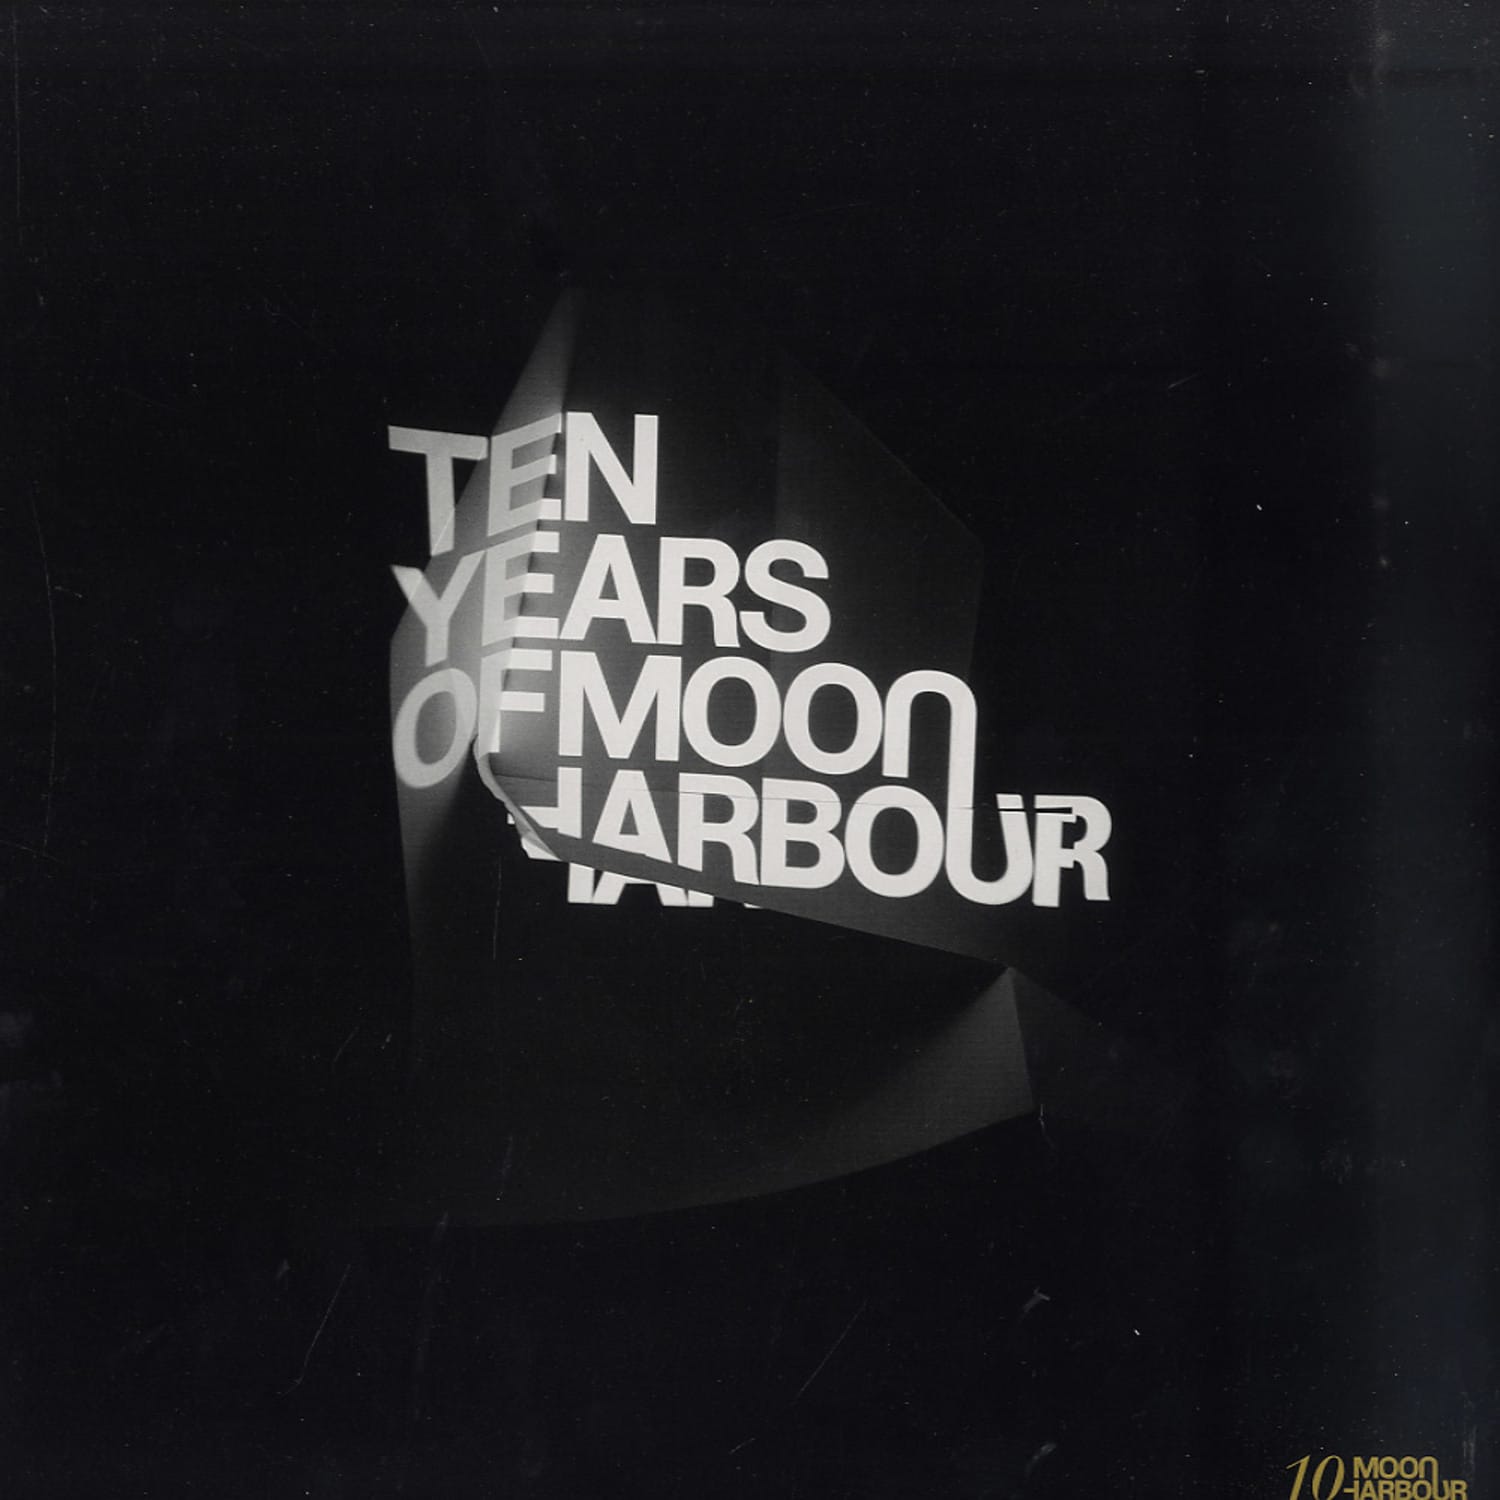 V/A - TEN YEARS OF MOON HARBOUR 